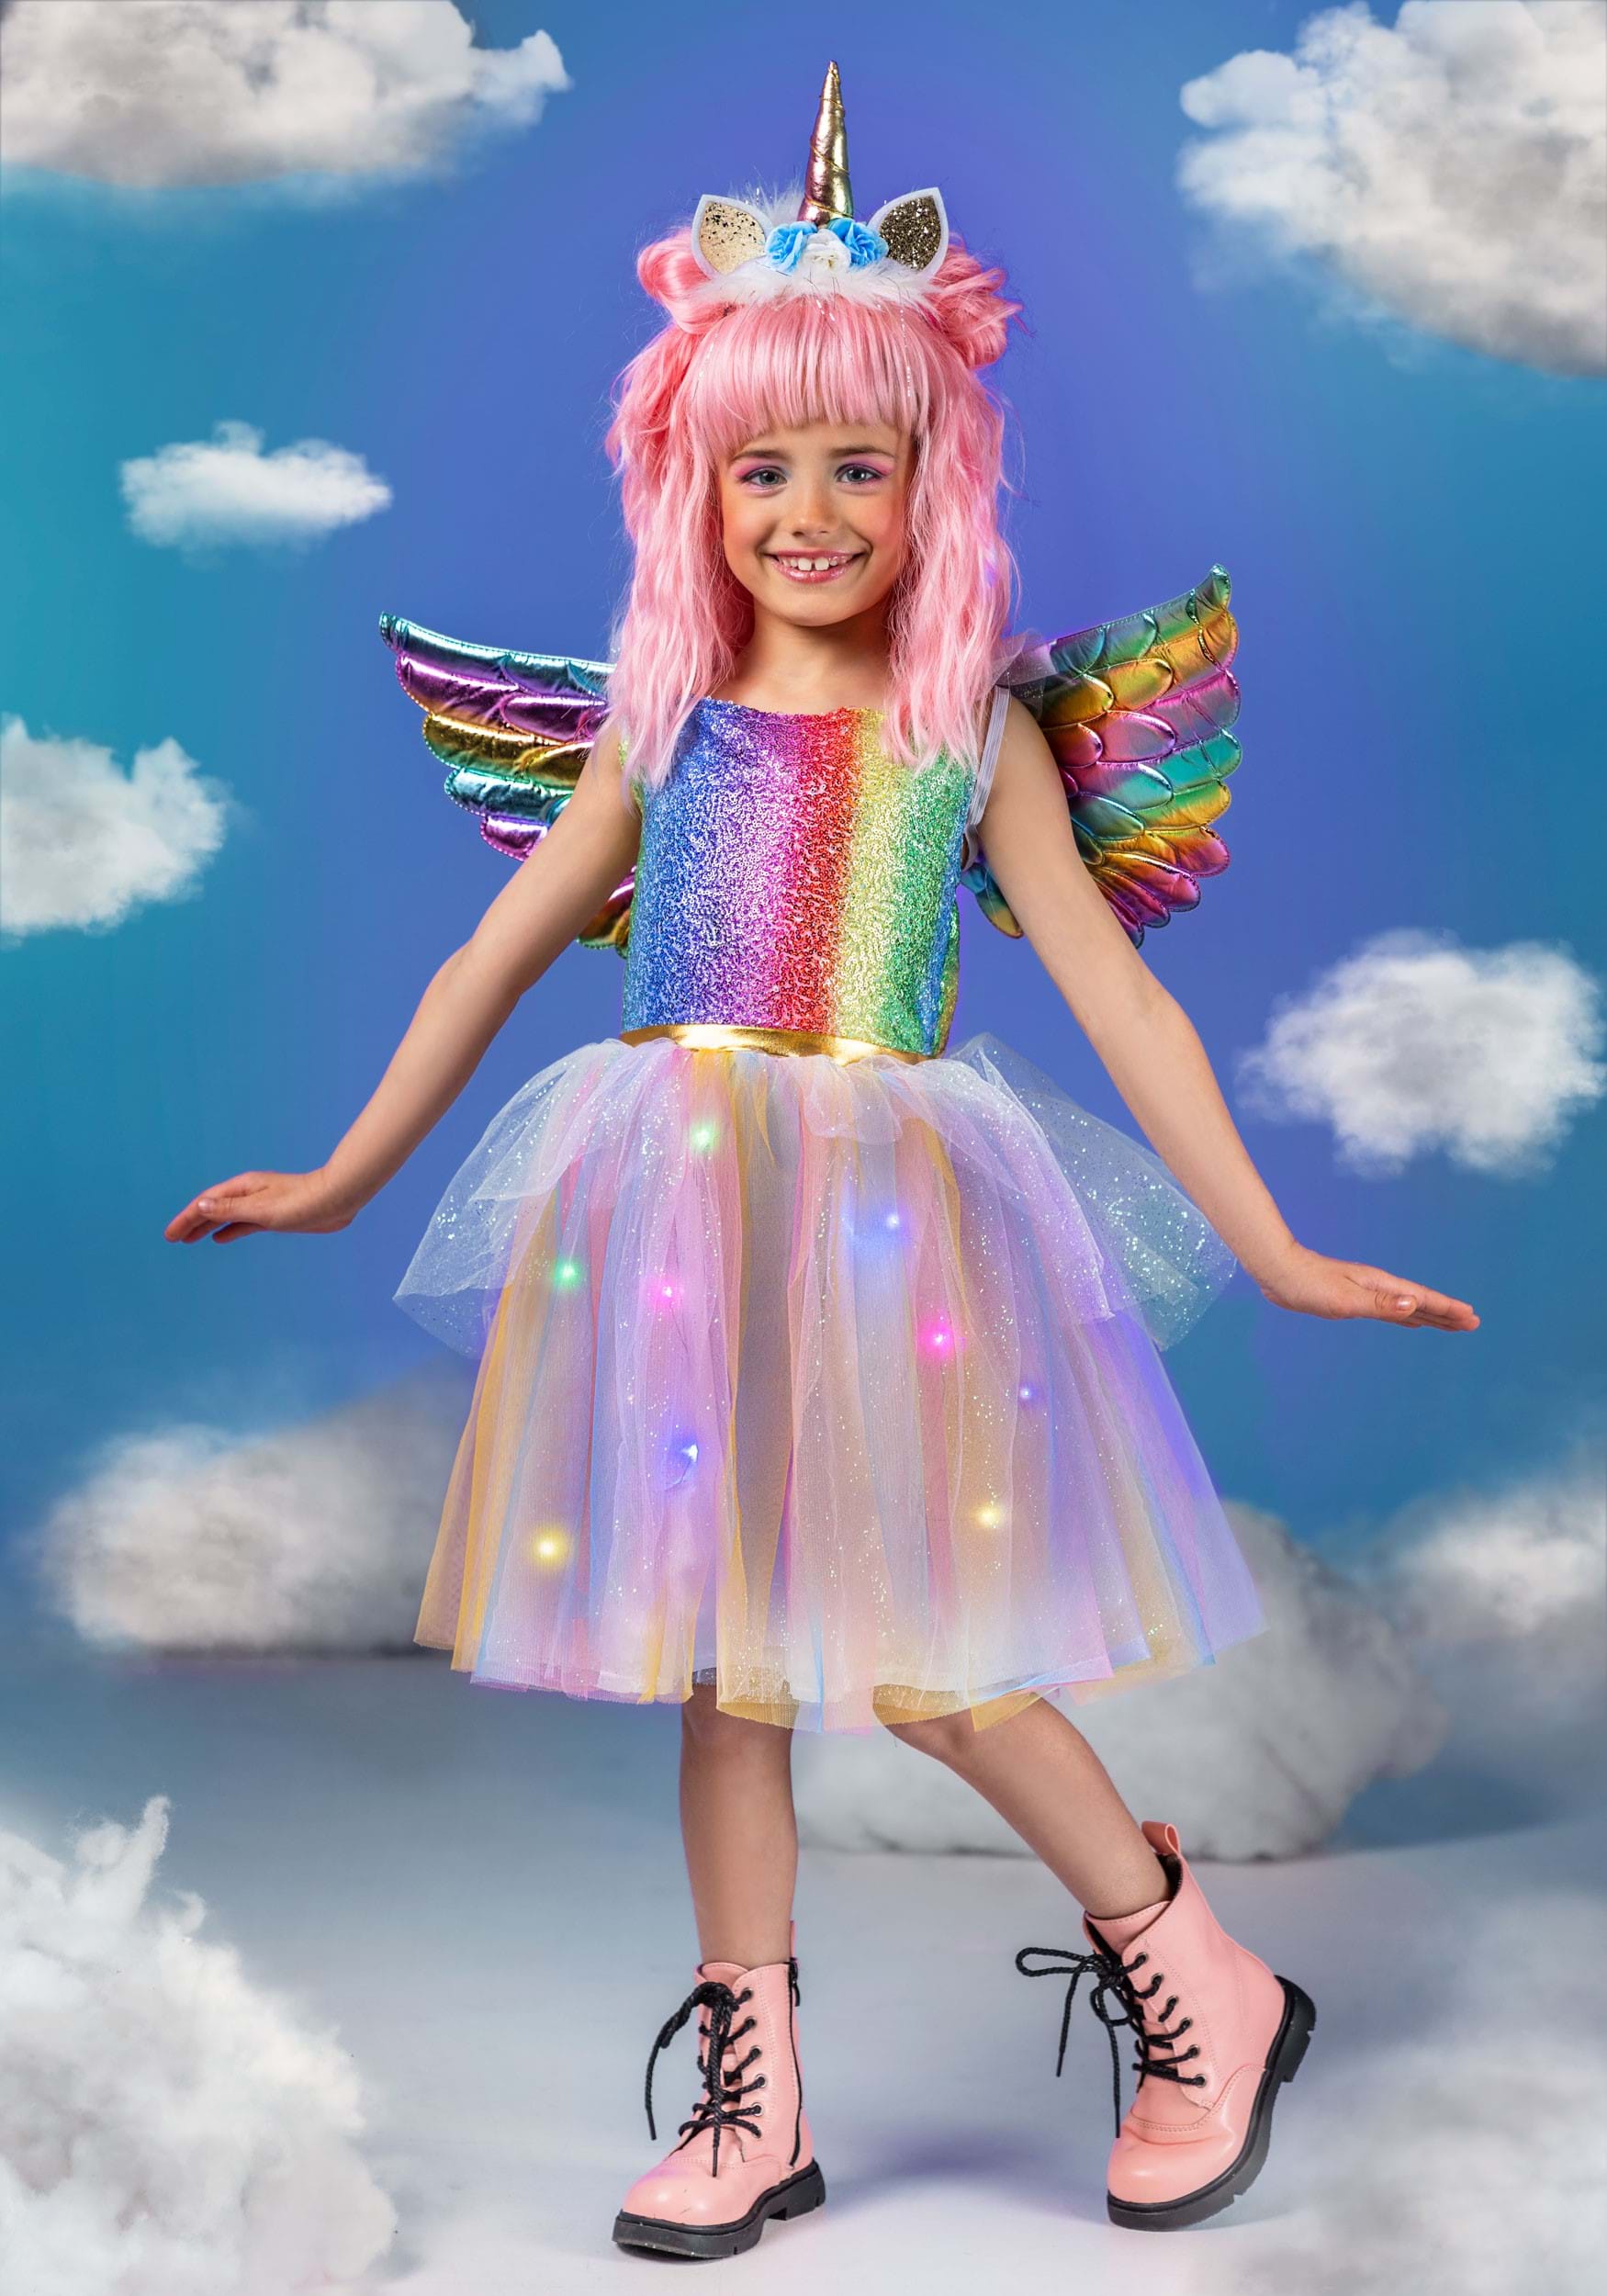 Unicorn Princess Dress Up Clothes for Little Girls – Costume, Jewelry and  Headband : : Toys & Games